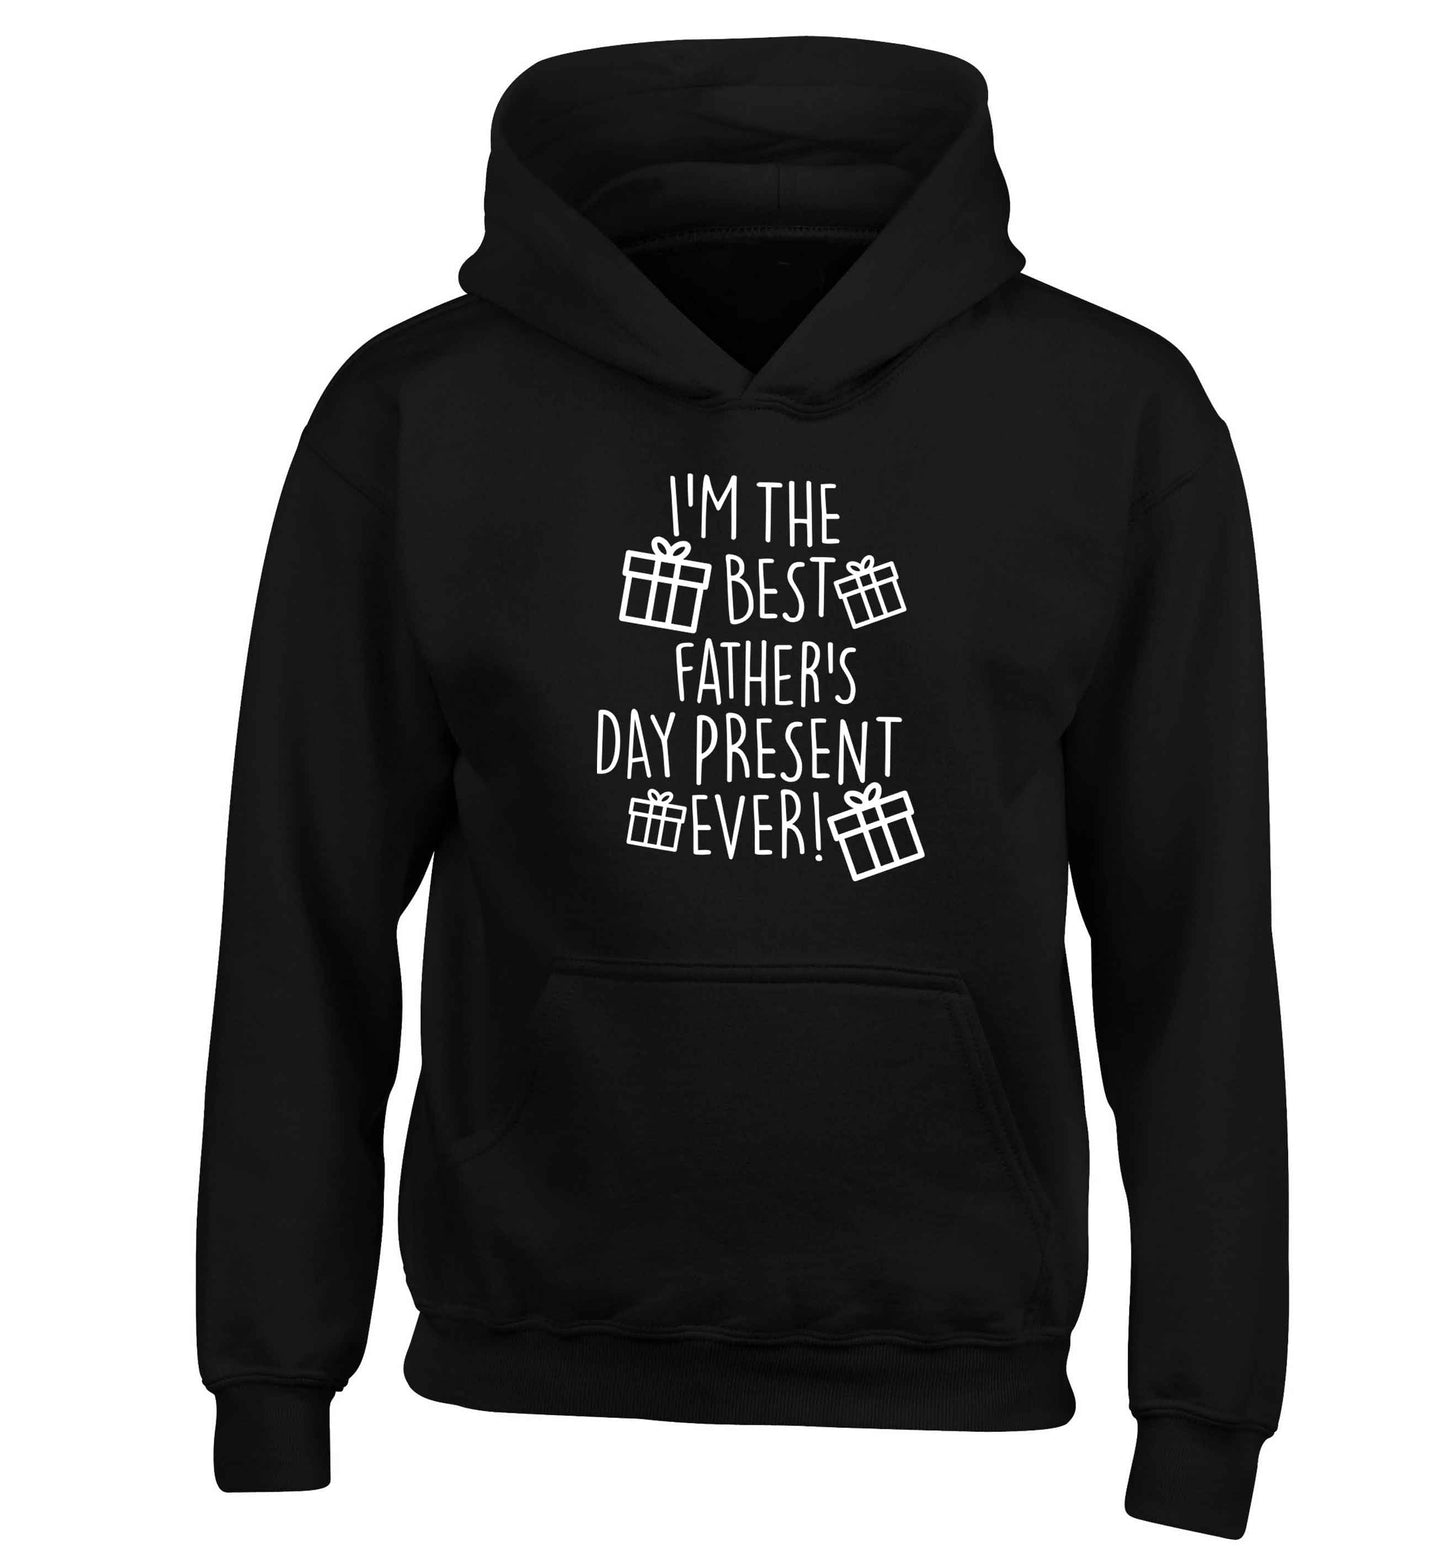 I'm the best father's day present ever!| Children's Hoodie